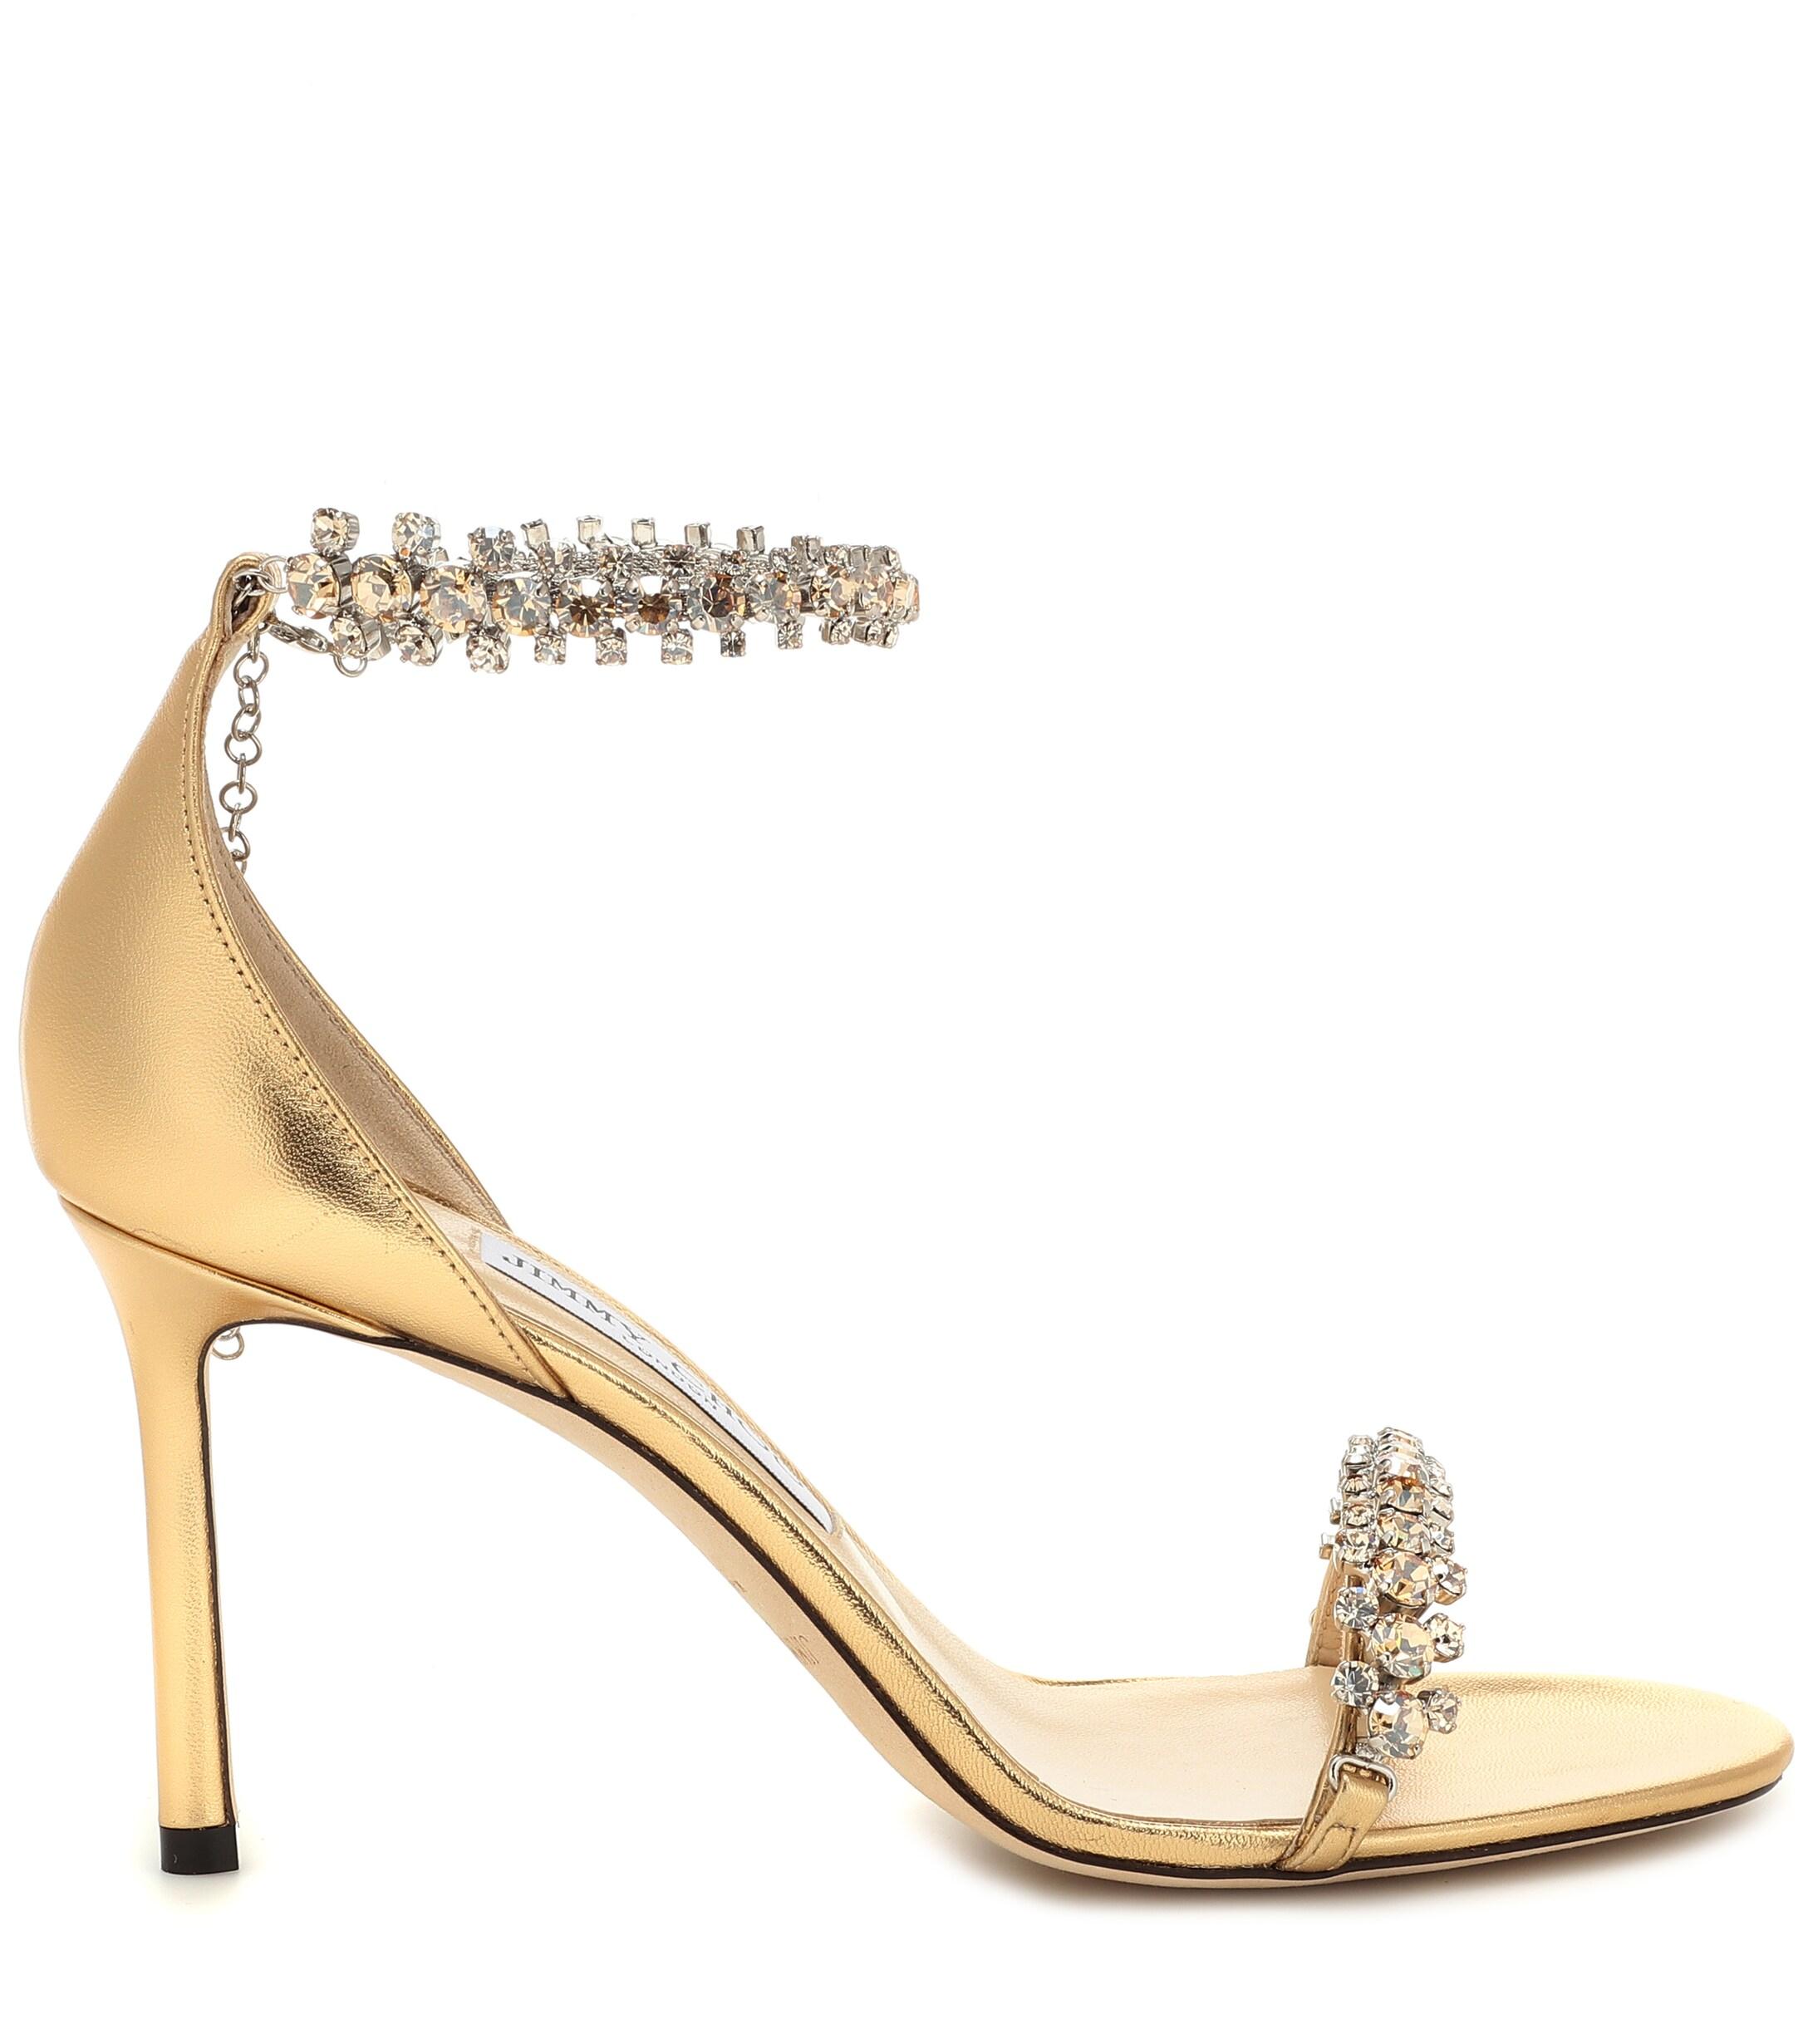 Jimmy Choo Shiloh 100 Gold Leather Sandals in Metallic - Lyst